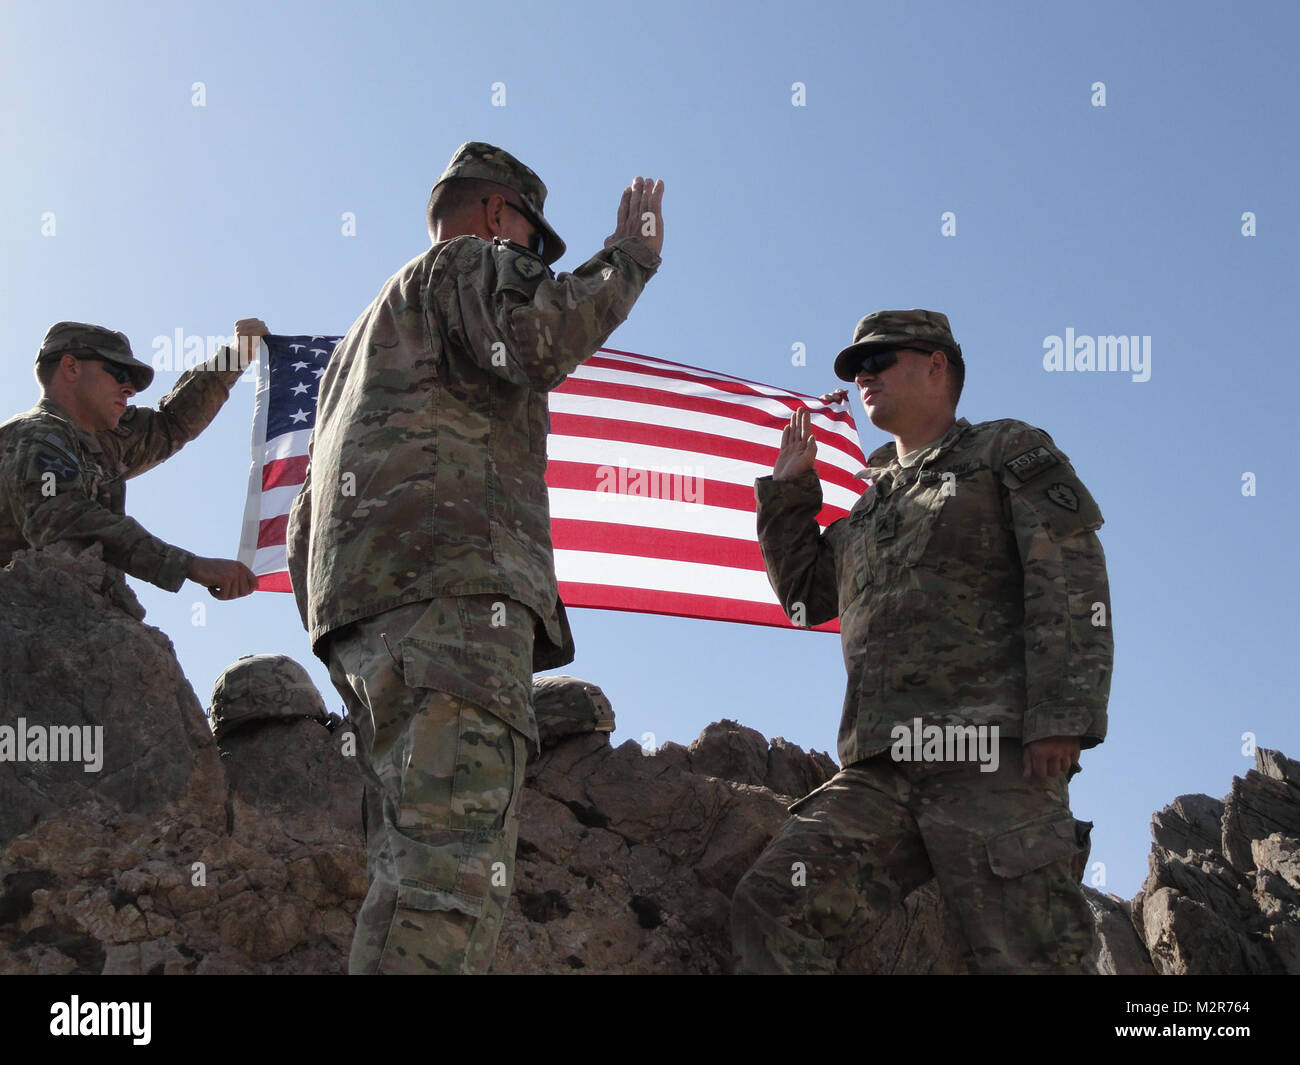 Col. Todd Wood, Commander of the 1st Stryker Brigade Combat Team, 25th Infantry Division, reenlists Cpl. Wiley Pritchett, an infantryman with the 1/25 SBCT Tactical Assault Command, in a ceremony at the top of the mountain above Forward Operating Base Masum Ghar on 2 September. U.S. Army photo by Sgt. 1st Class Melanie Currasco 1/25 SBCT Communications Shop 111002-A-3728C-005 by 1 Stryker Brigade Combat Team Arctic Wolves Stock Photo